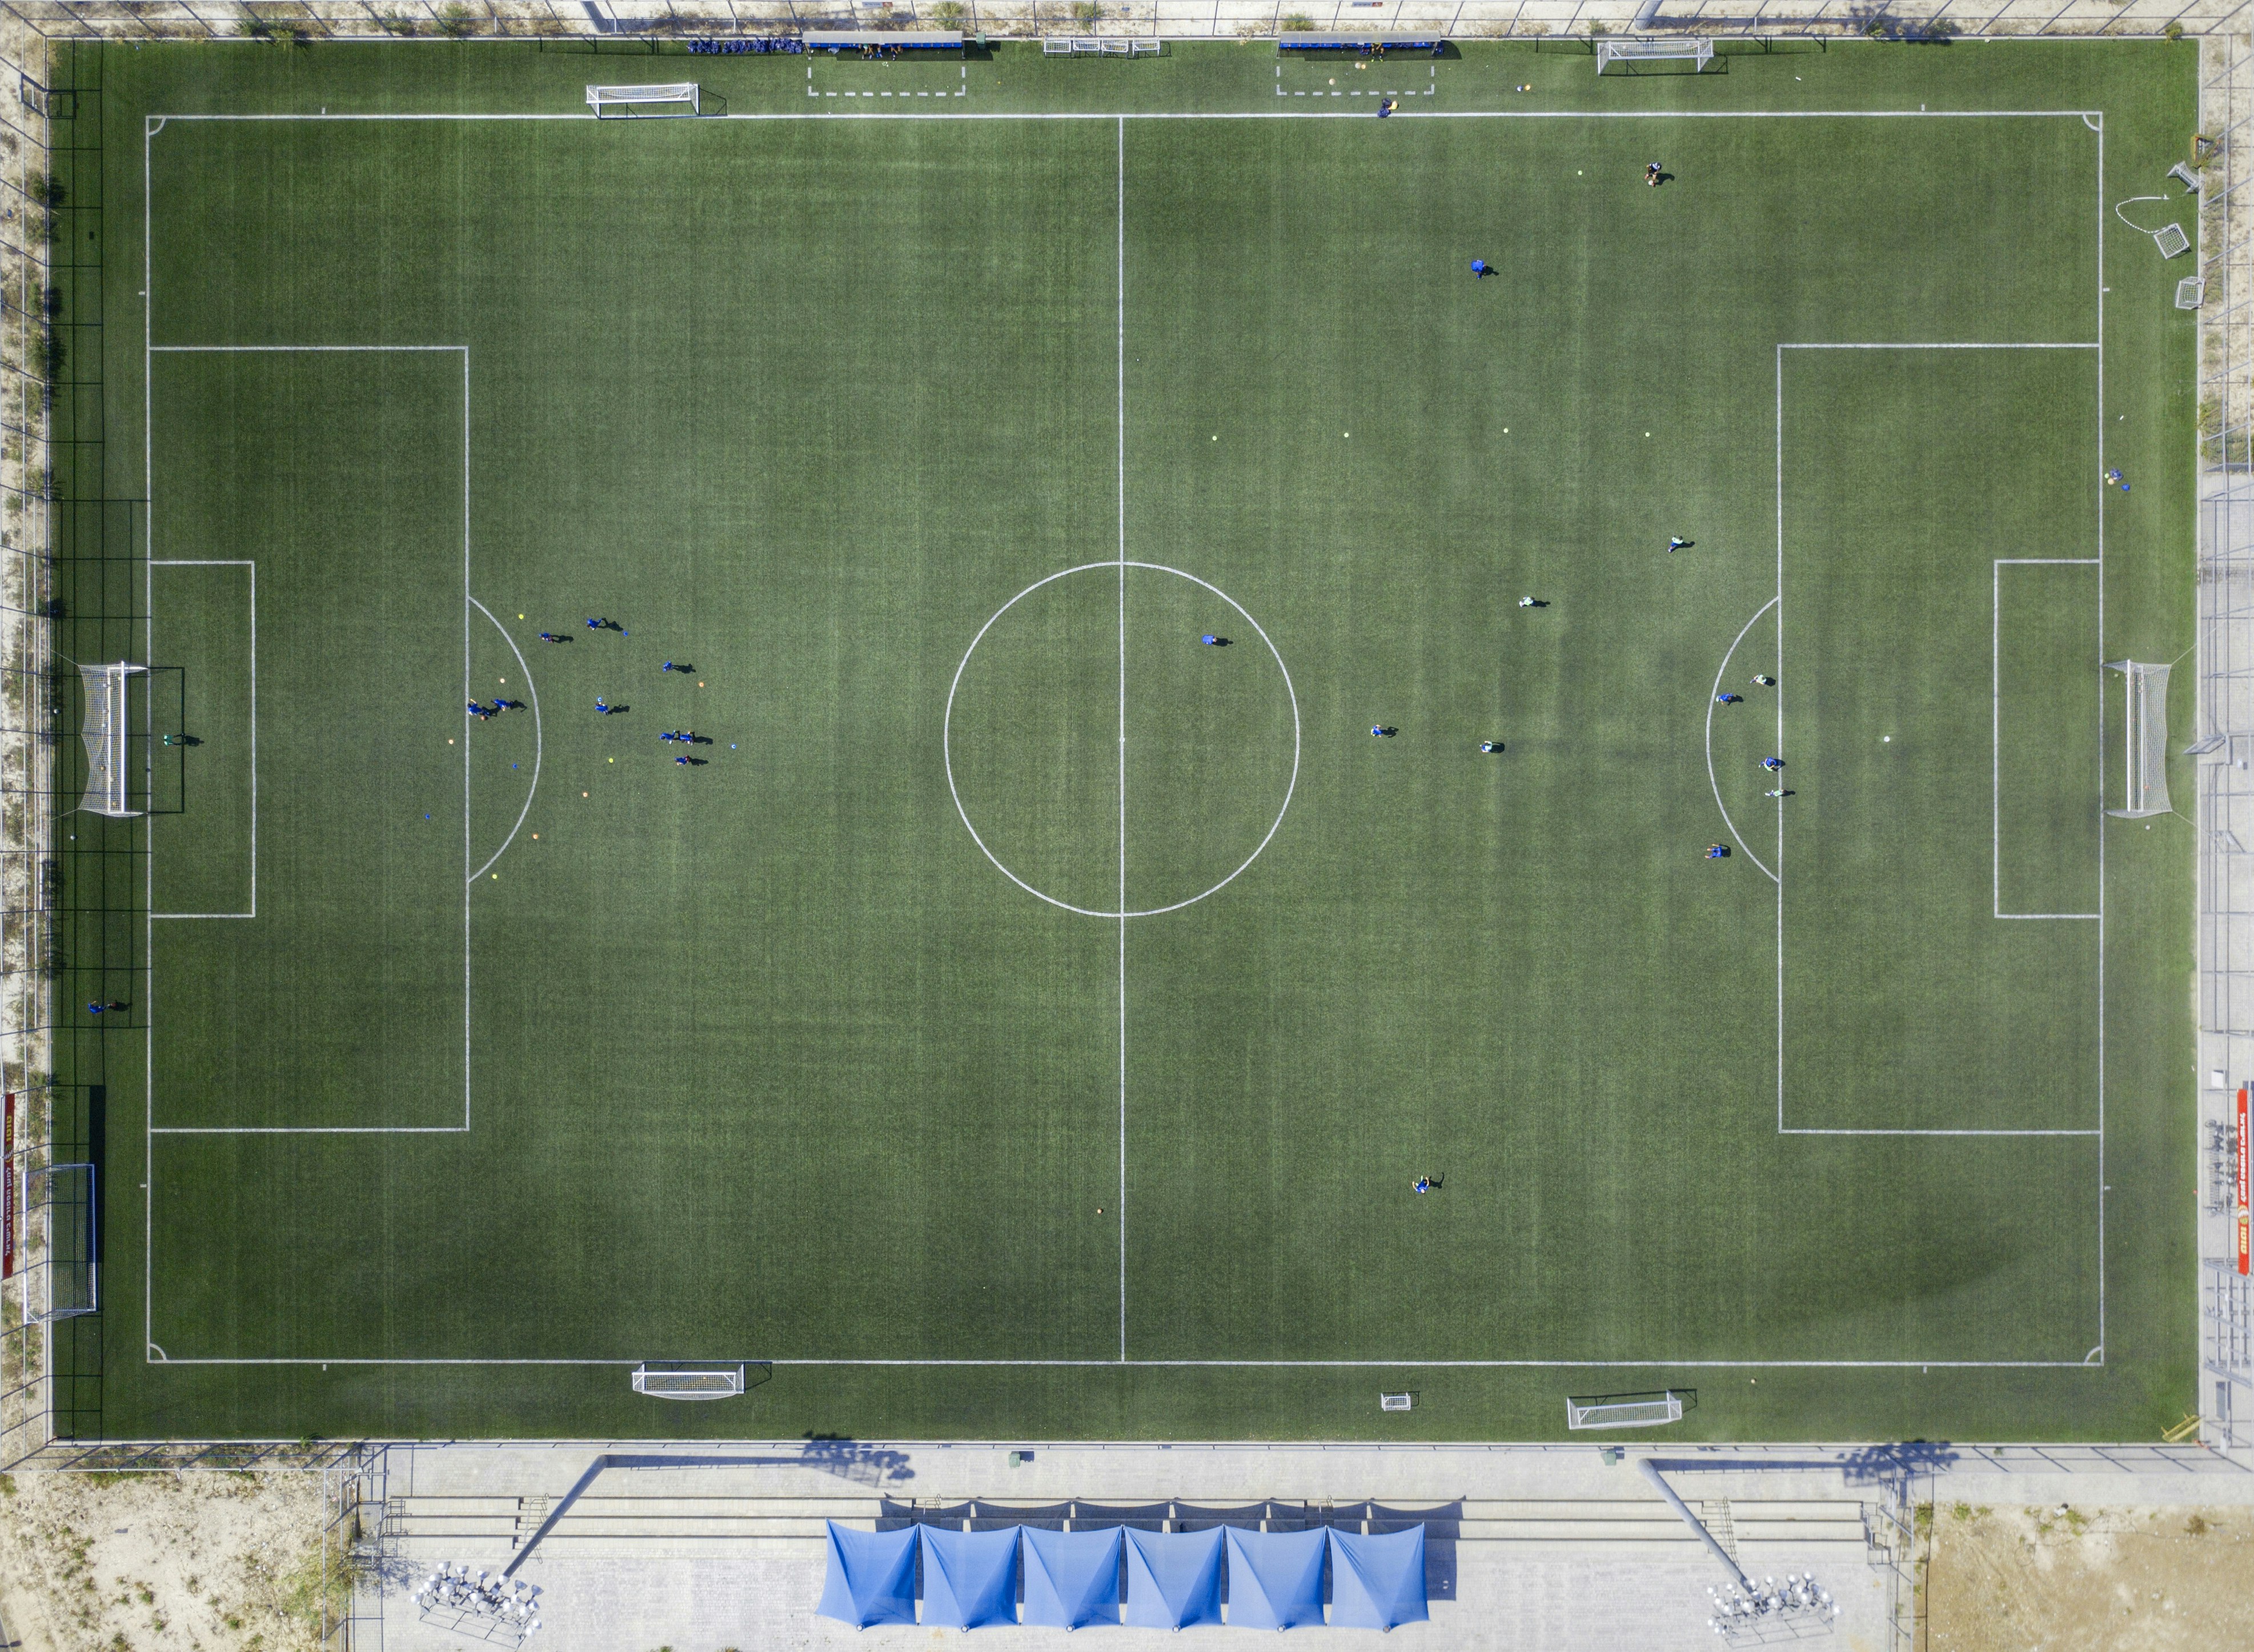 aerial view photo of sports field